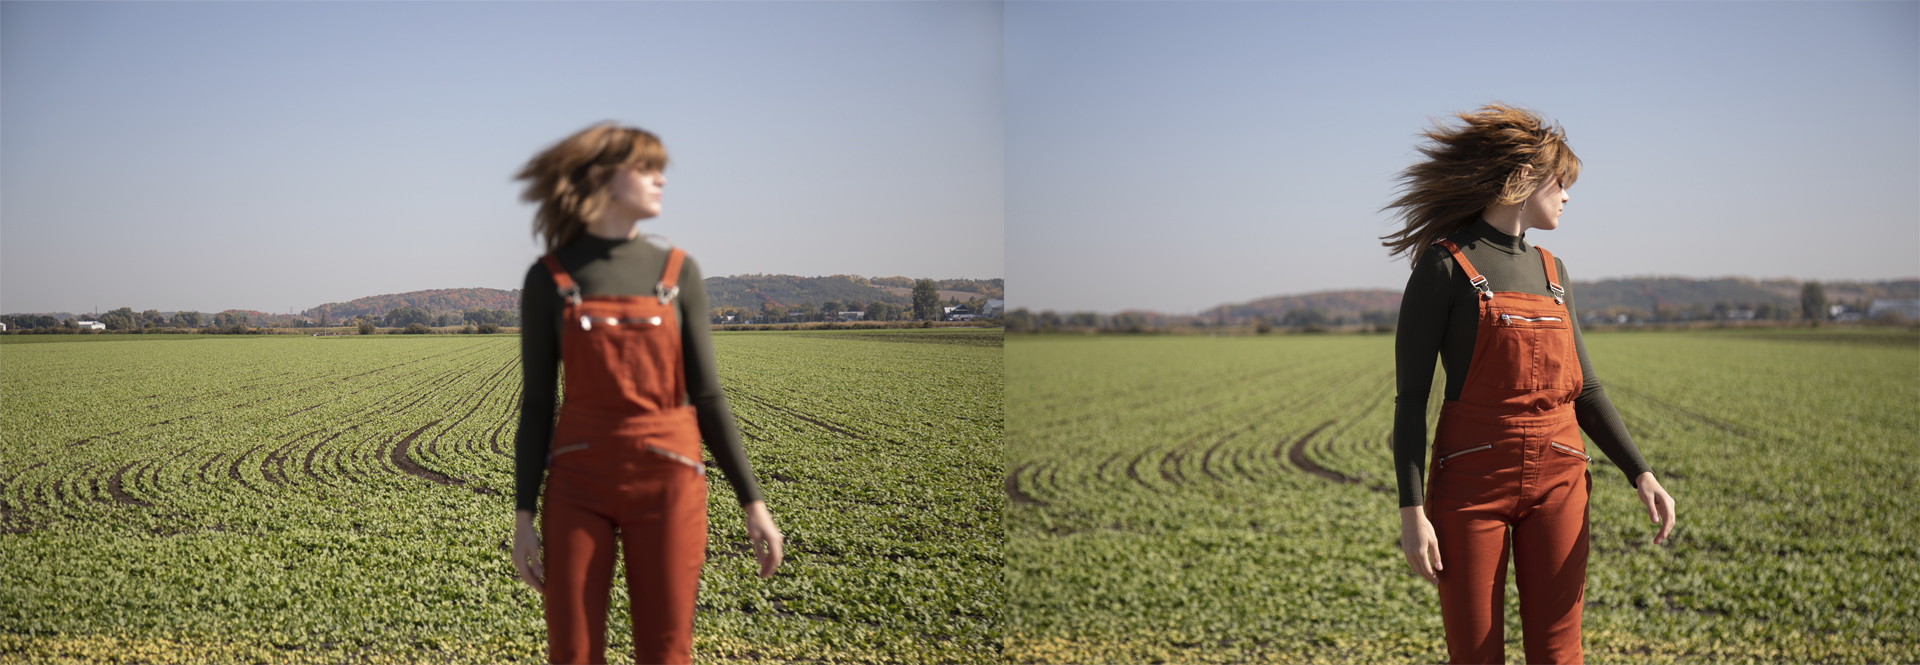 Carrot Fields: two images of the same woman standing in front of a farm field on a sunny day. Her hair is being blown in the wind as she turns her head. In the first image the woman is out of focus and the background is sharp. In the second image the woman is in focus and the background is blurred.